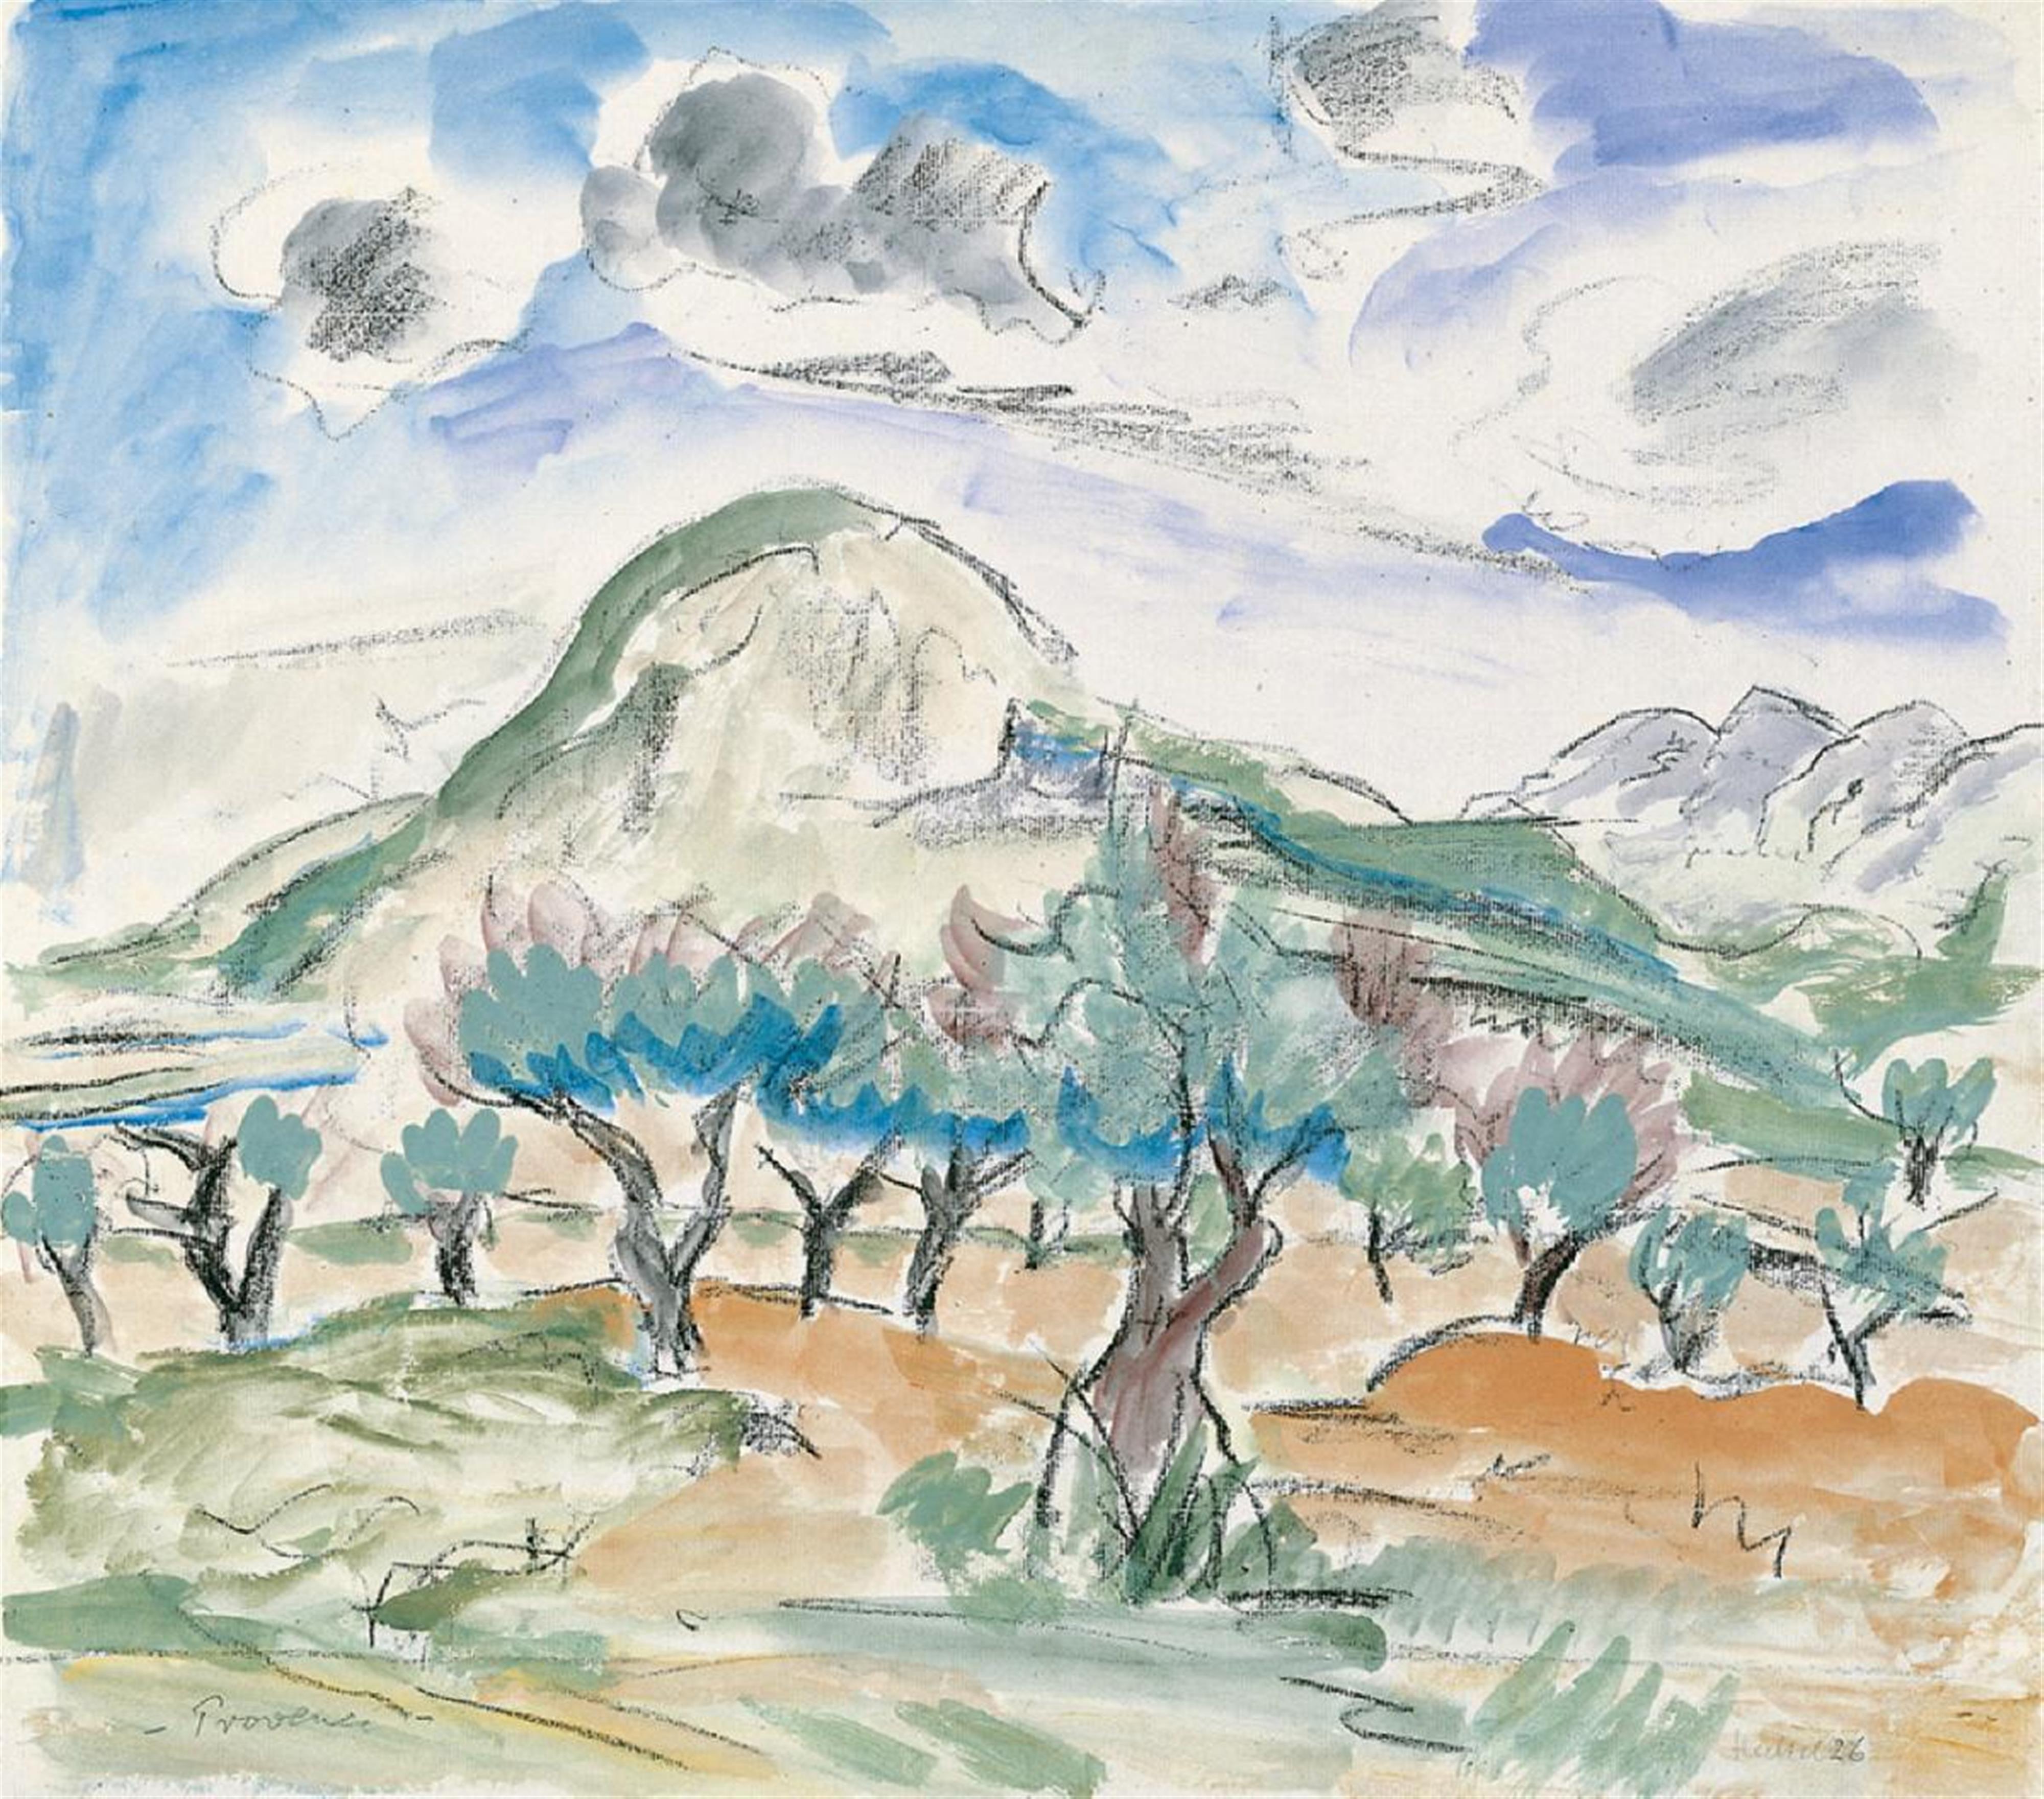 Erich Heckel - Provence - image-2